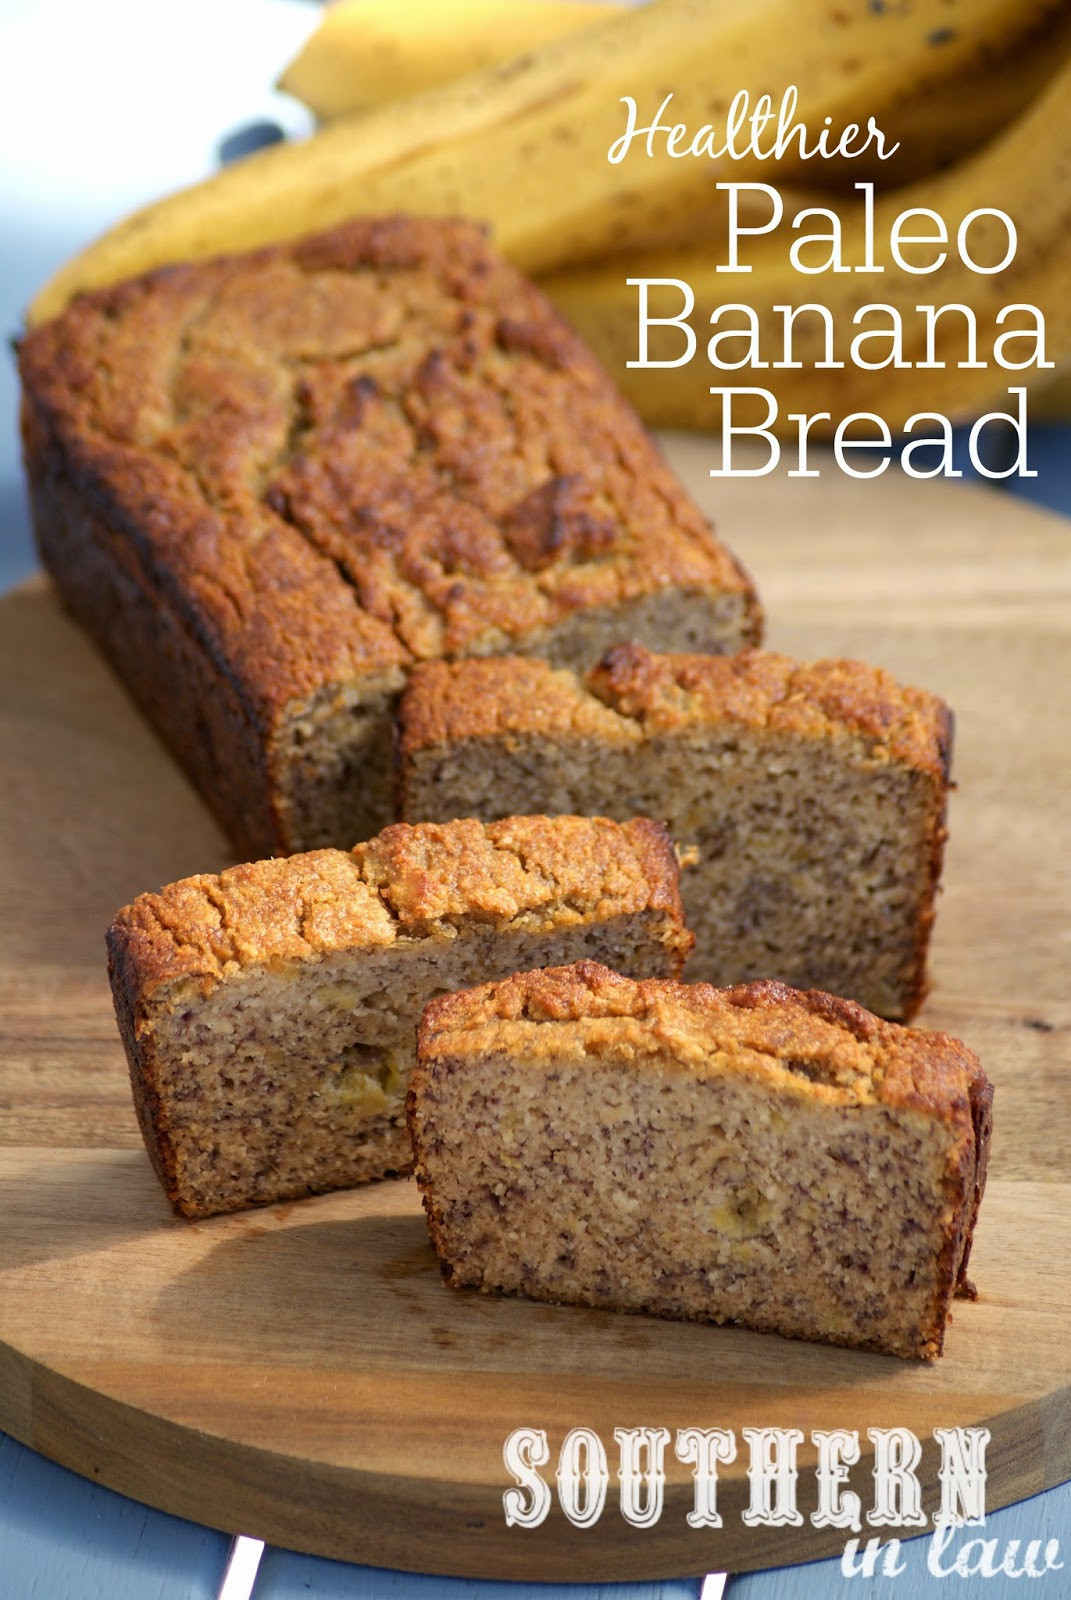 Low Carb Banana Bread Recipe
 Southern In Law Recipe The Best Healthy Paleo Banana Bread